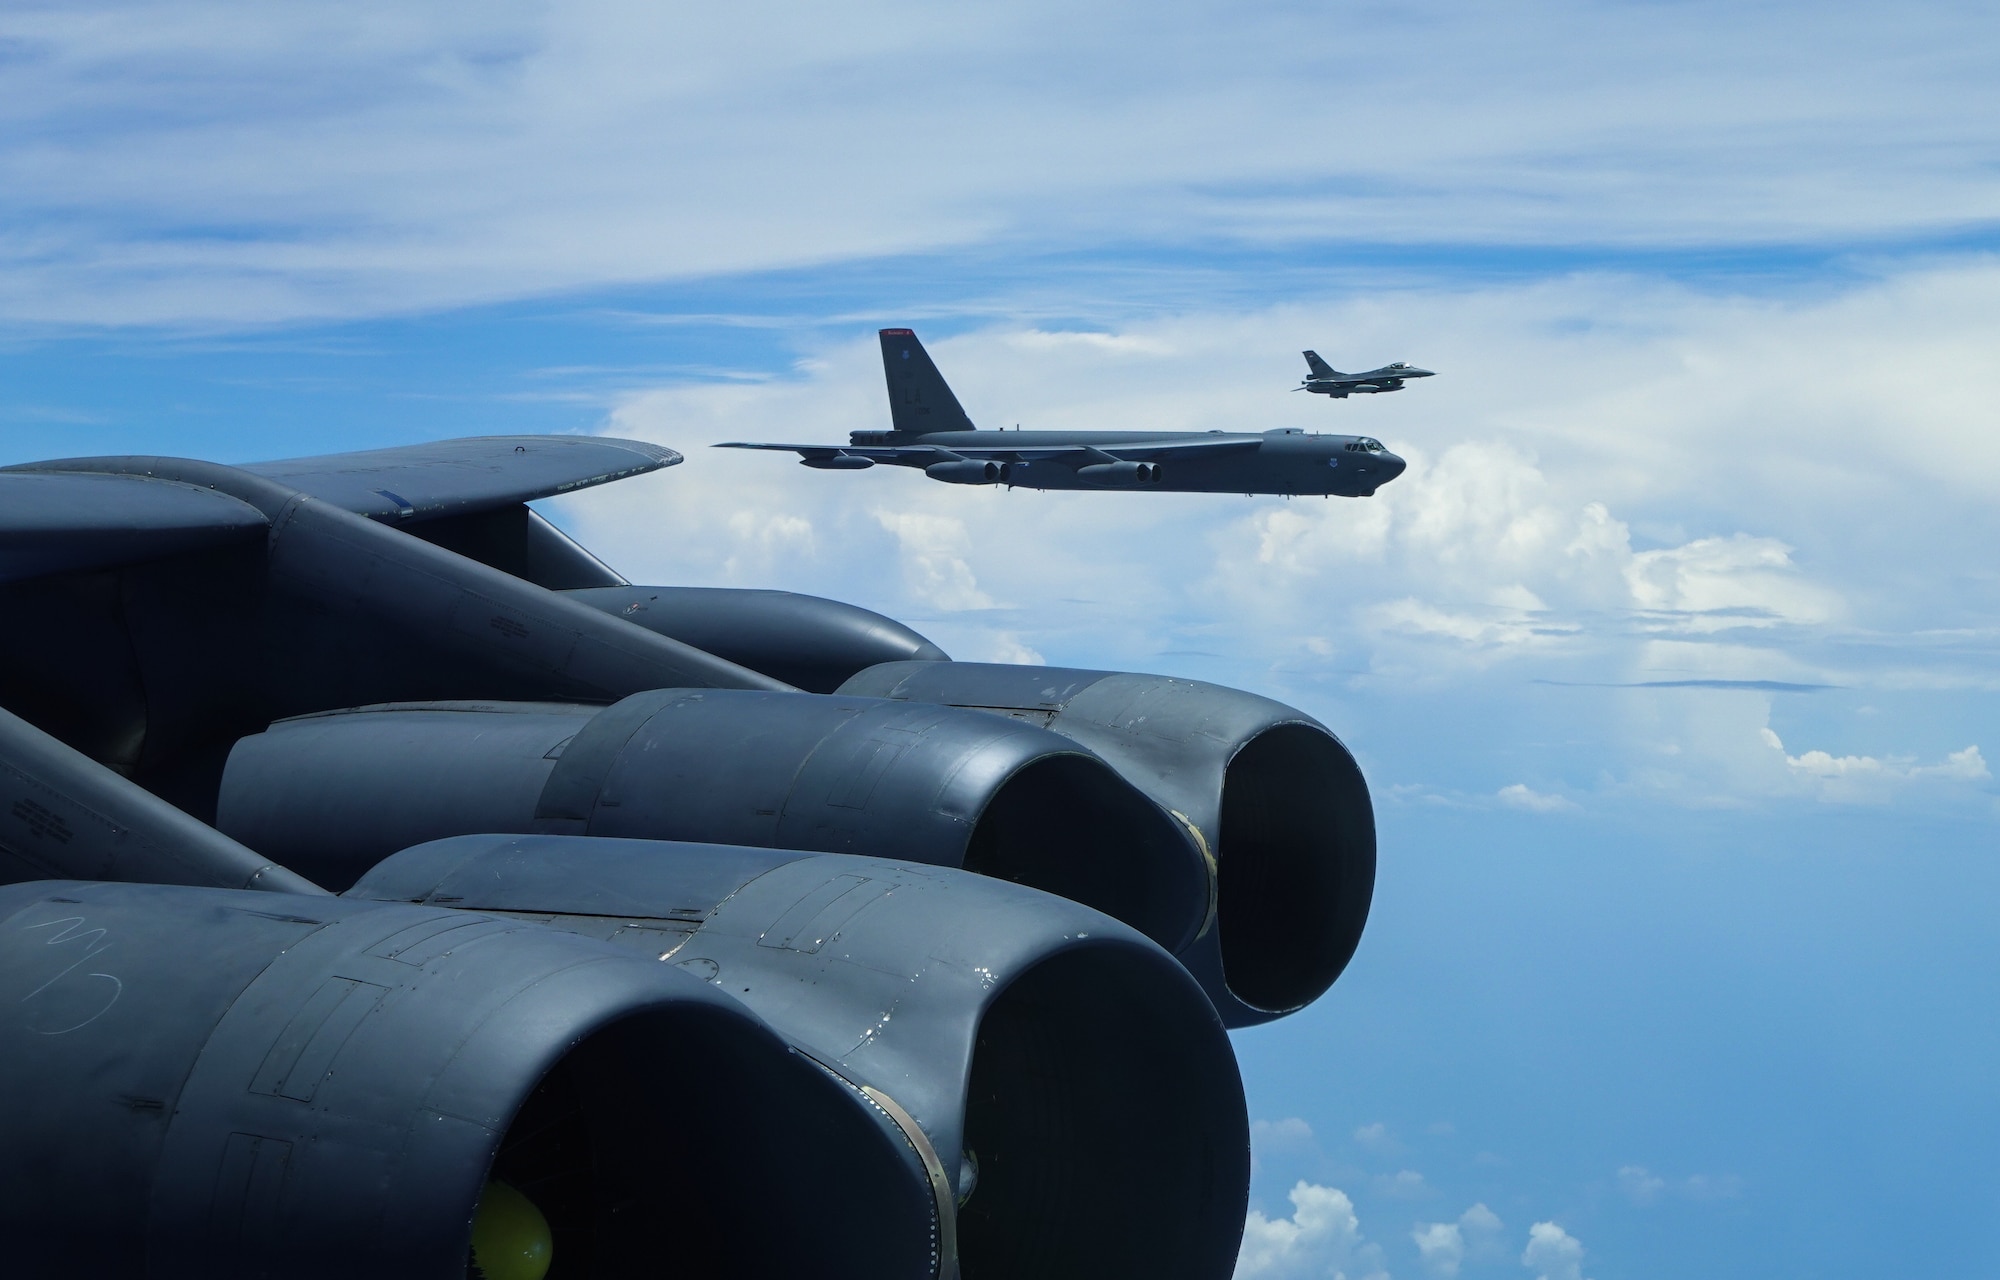 A U.S. Air Force B-52 Stratofortress assigned to the 2nd Bomb Wing, Barksdale Air Force Base, Louisiana, flies next to an Indonesian Air Force F-16 during a Bomber Task Force (BTF) deployment in the Indo-Pacific region, Sept. 1, 2021. This is the first time a B-52 has integrated with the Indonesian Air Force during flight. BTF missions demonstrate the credibility of our forces to address a diverse and uncertain security environment. (U.S. Air Force photo by Tech. Sgt. Matthew Lotz)